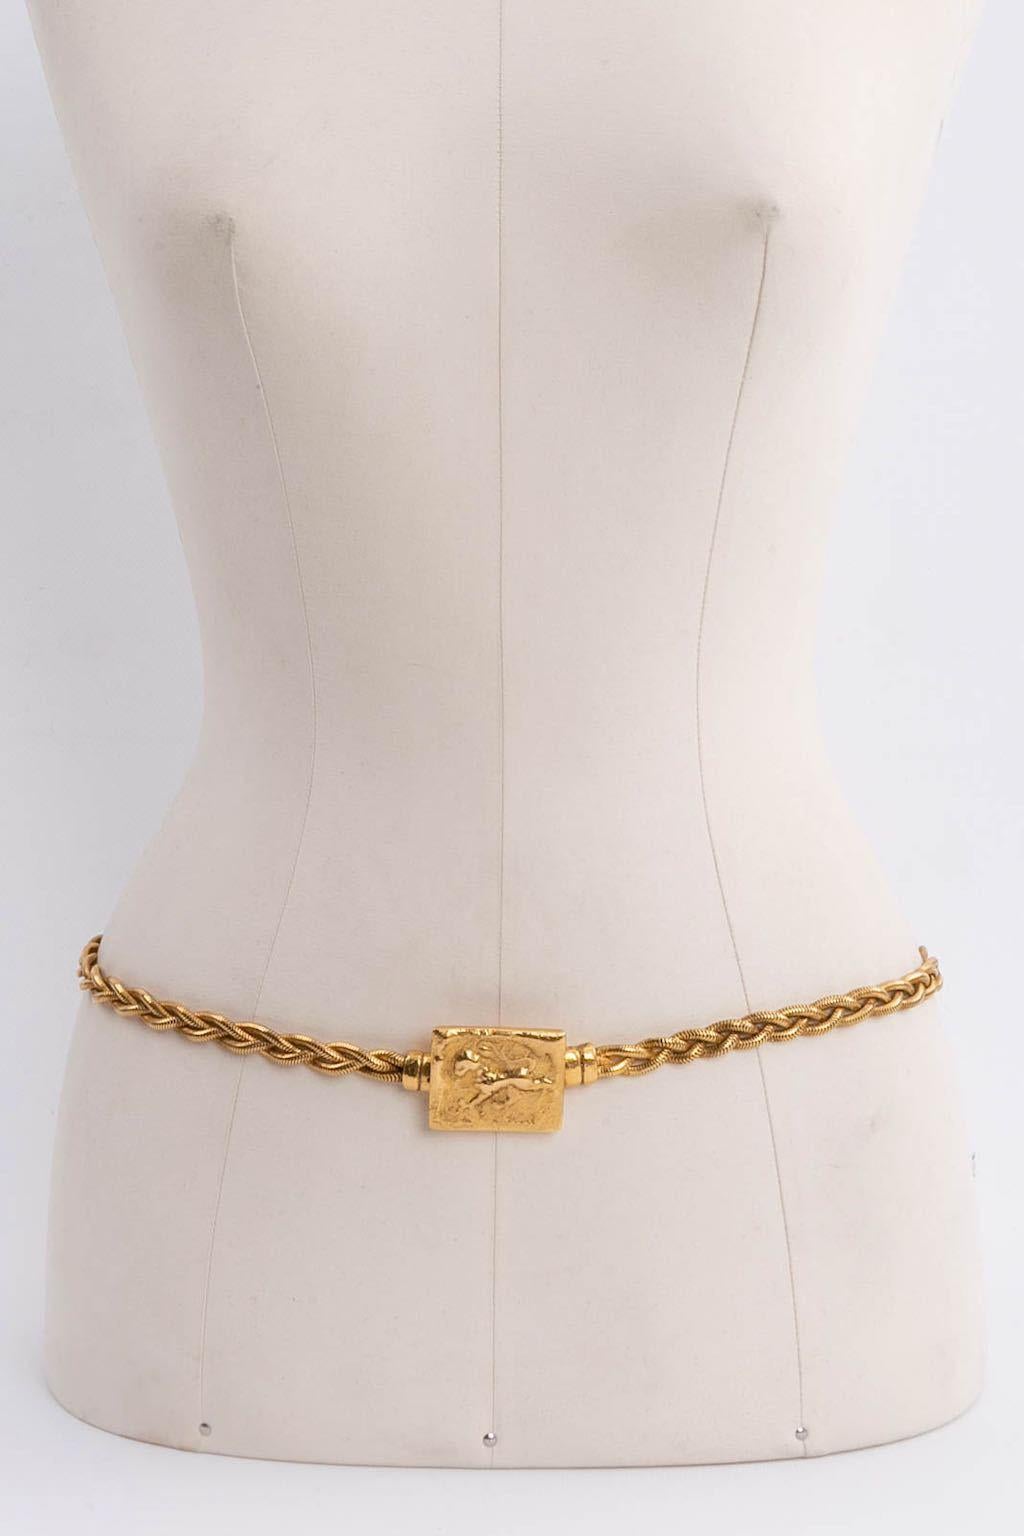 Chanel (Made in France) Gilded metal belt with a rectangular hammered buckle.

Additional information: 
Dimensions: Length: 77 cm (30.31